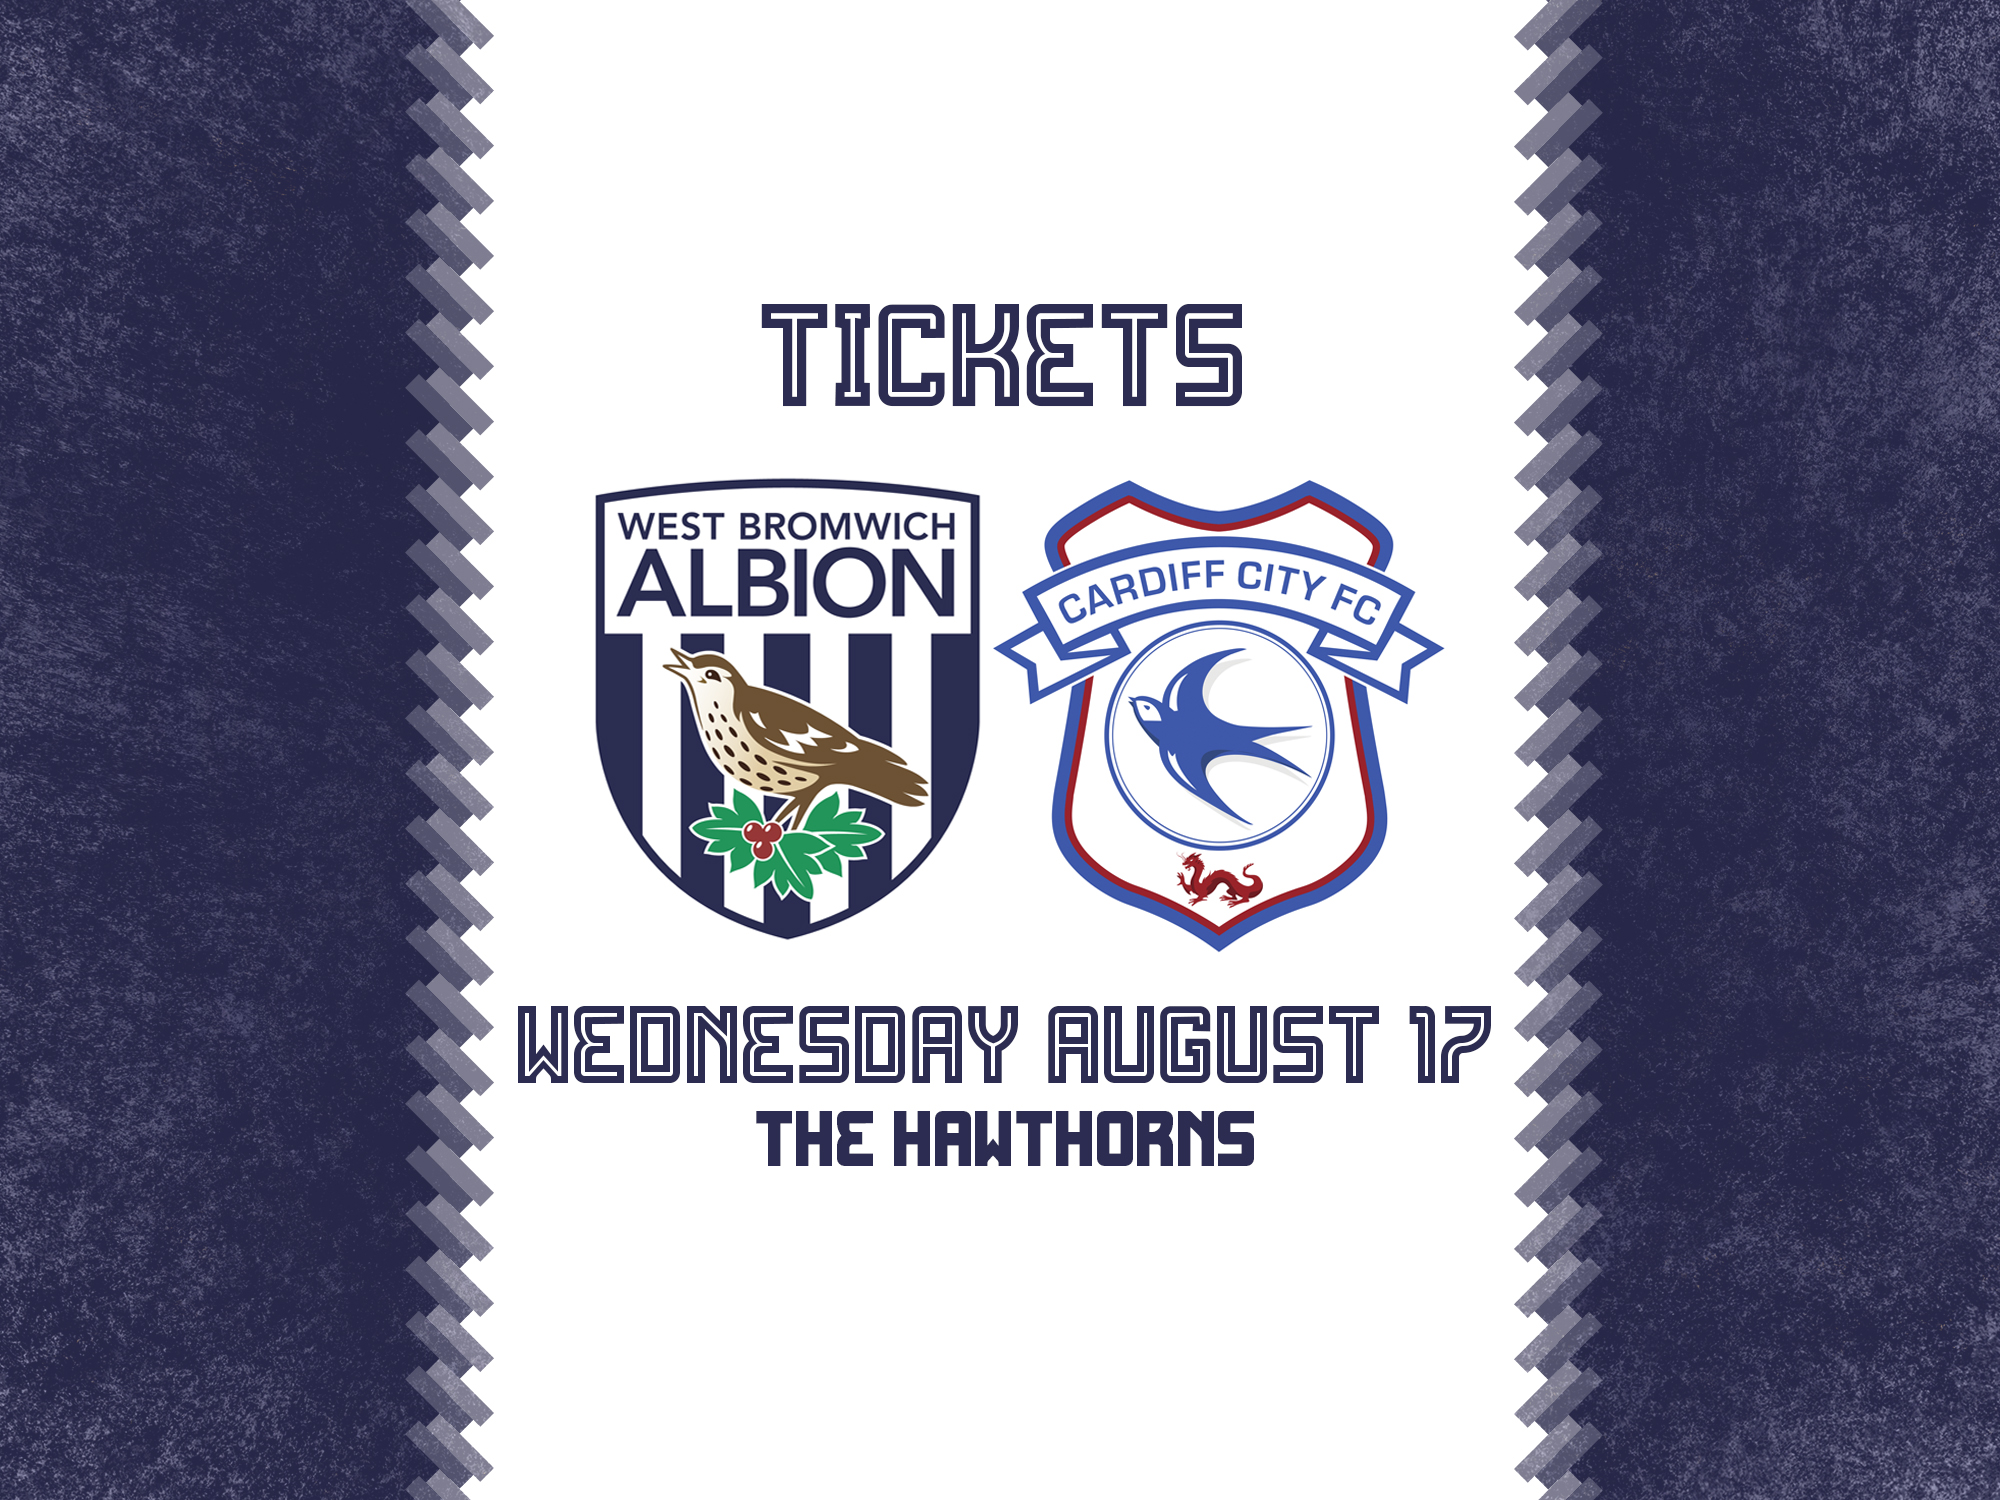 Tickets are now on sale for Albion's game against Cardiff City